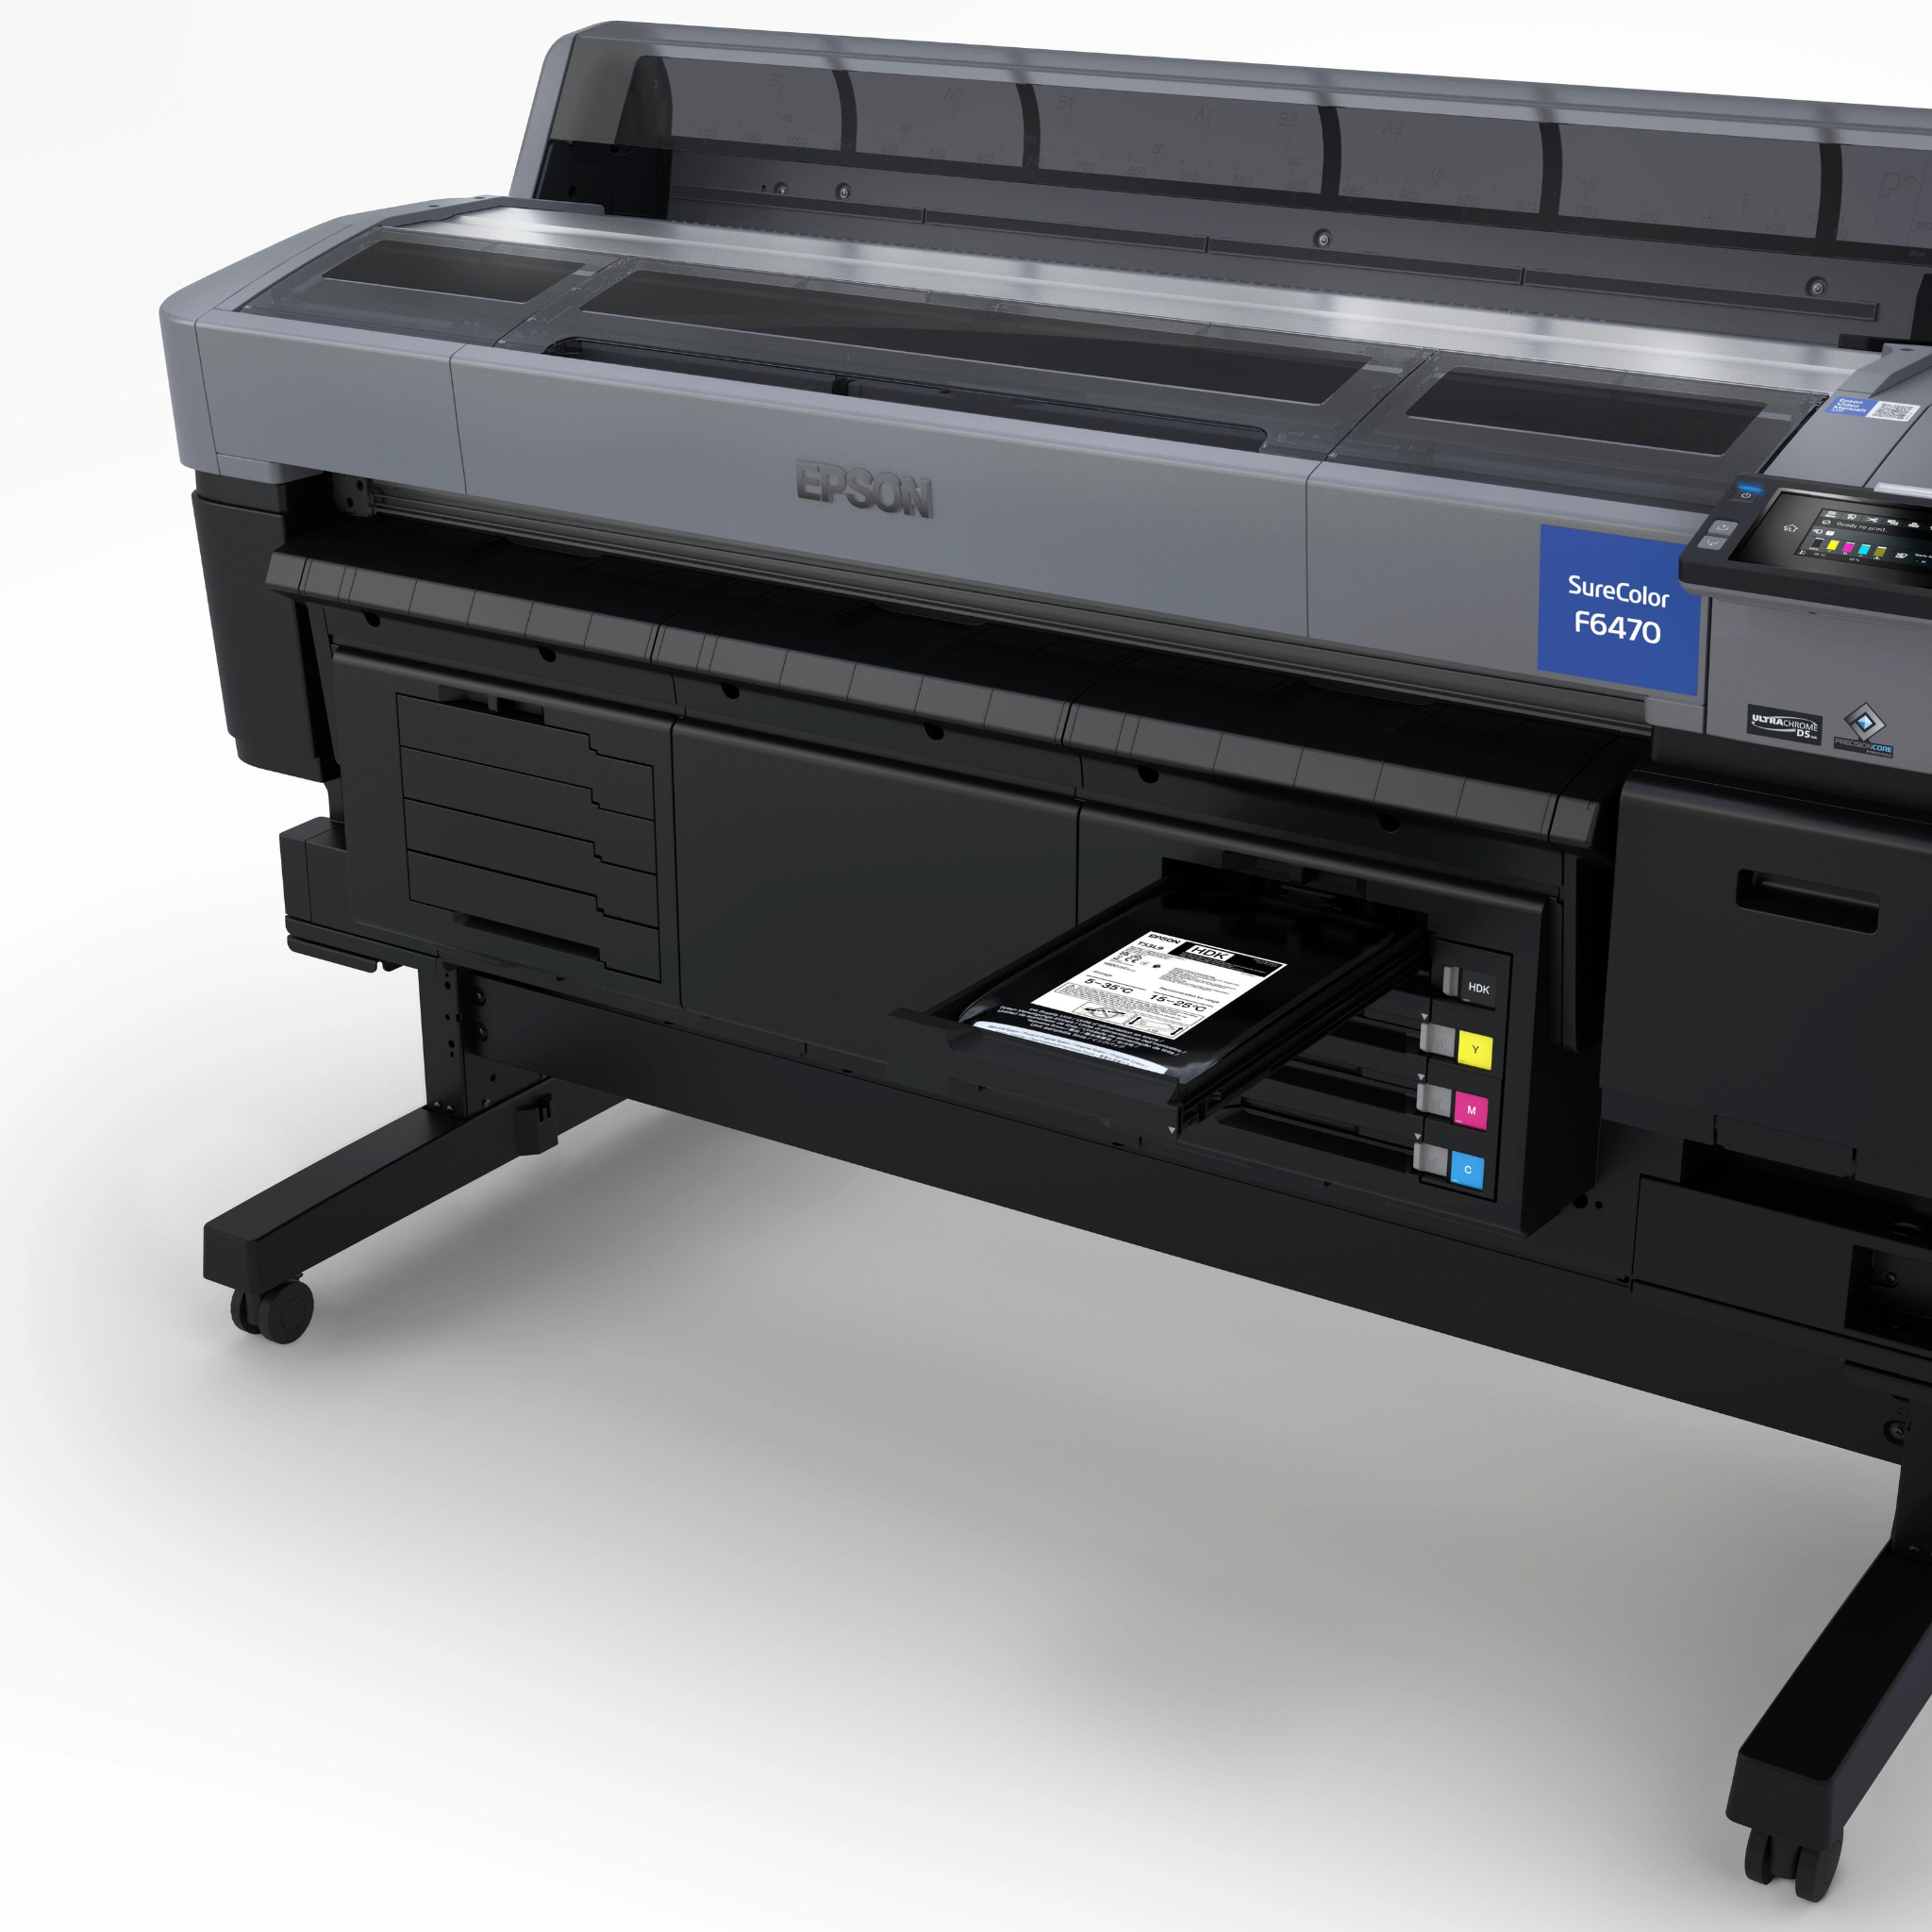 ink configuration for the epson surecolor f6470